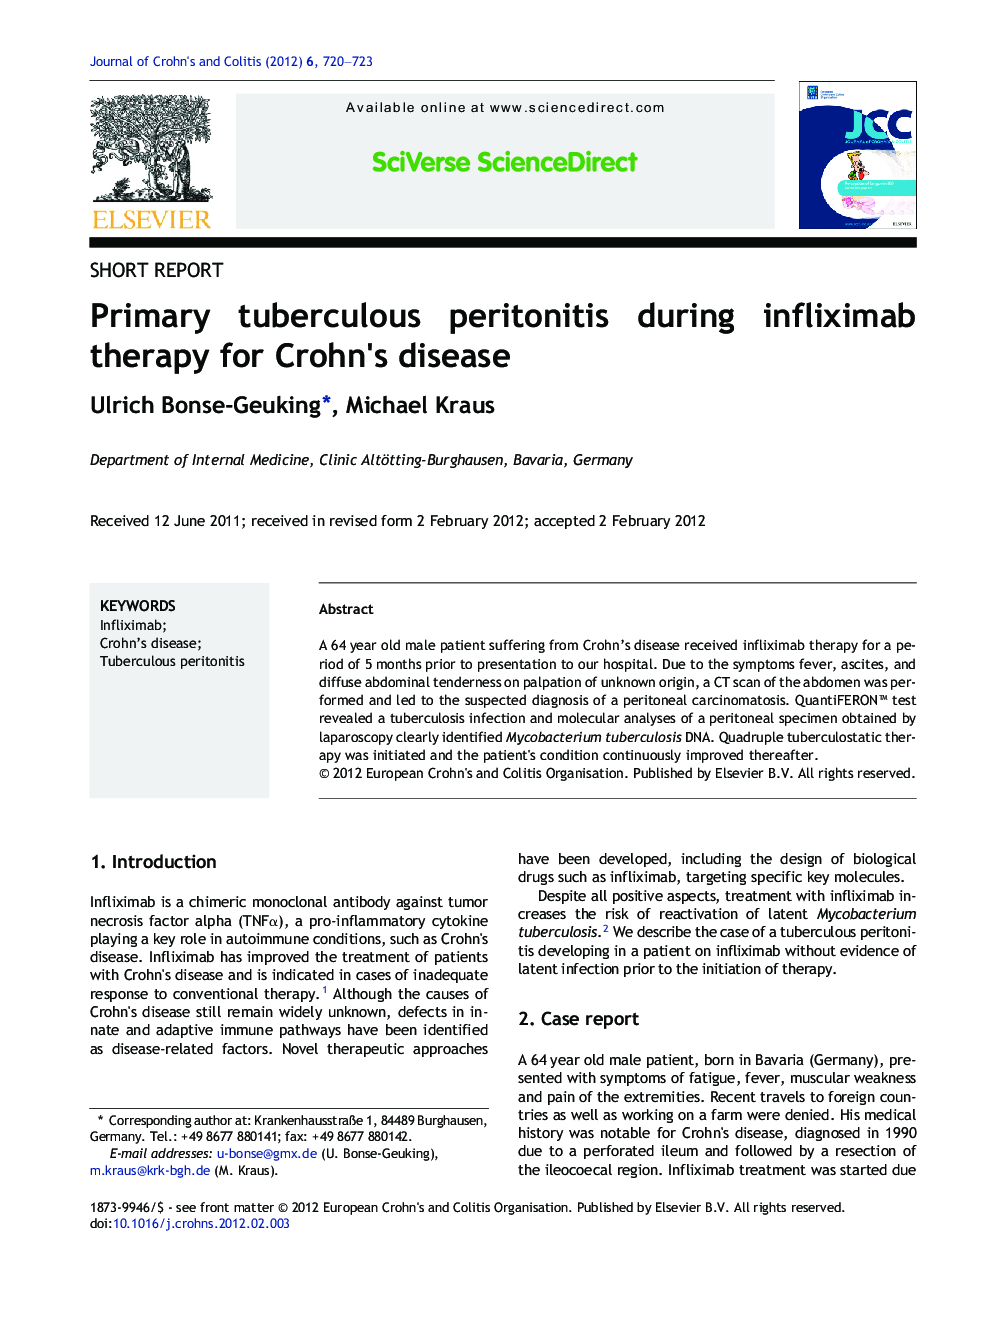 Primary tuberculous peritonitis during infliximab therapy for Crohn's disease